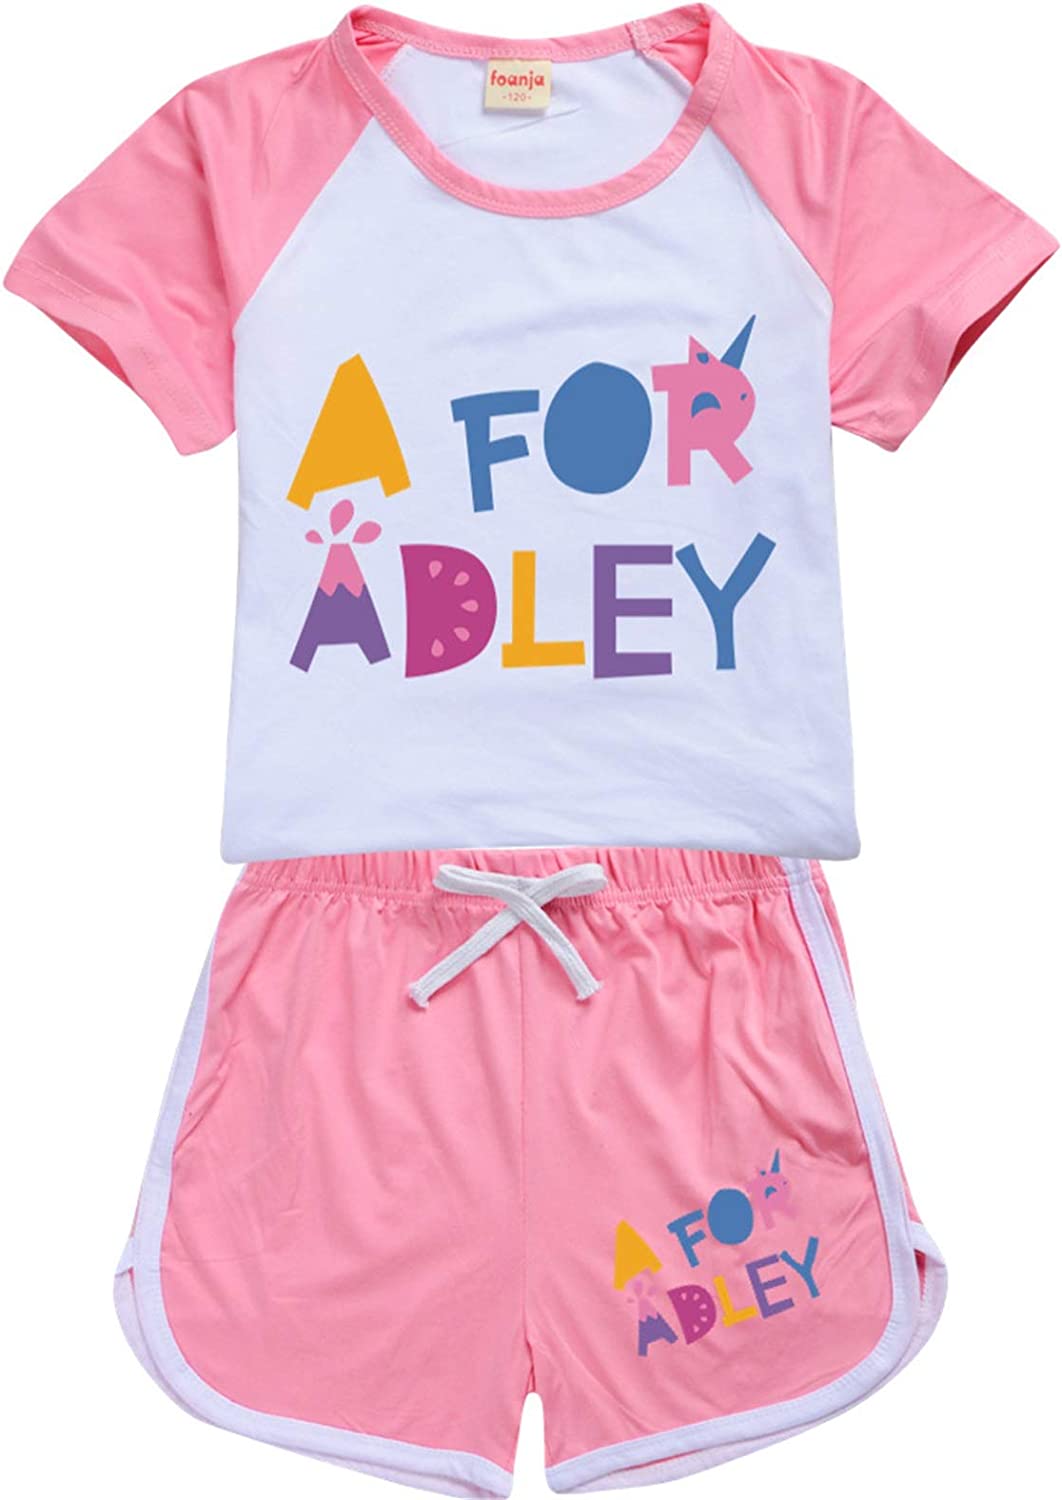 A for Adley Official Merchandise: Ignite Your Child's Creativity